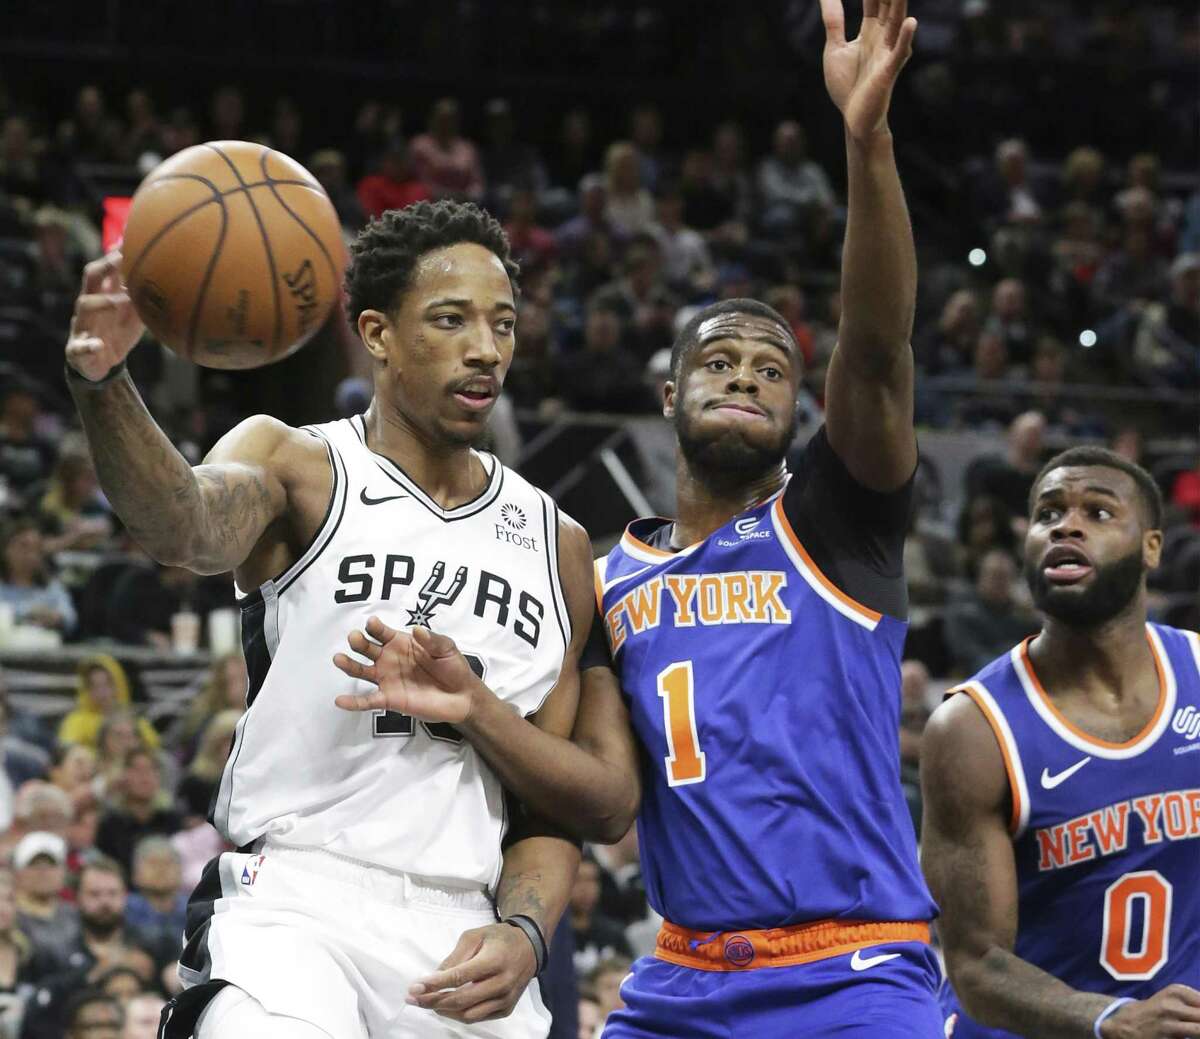 DeMar DeRozan passes out from the paint past Emmanuel Mudiay as the Spurs host the Knicks at the AT&T Center on March 15, 2019.